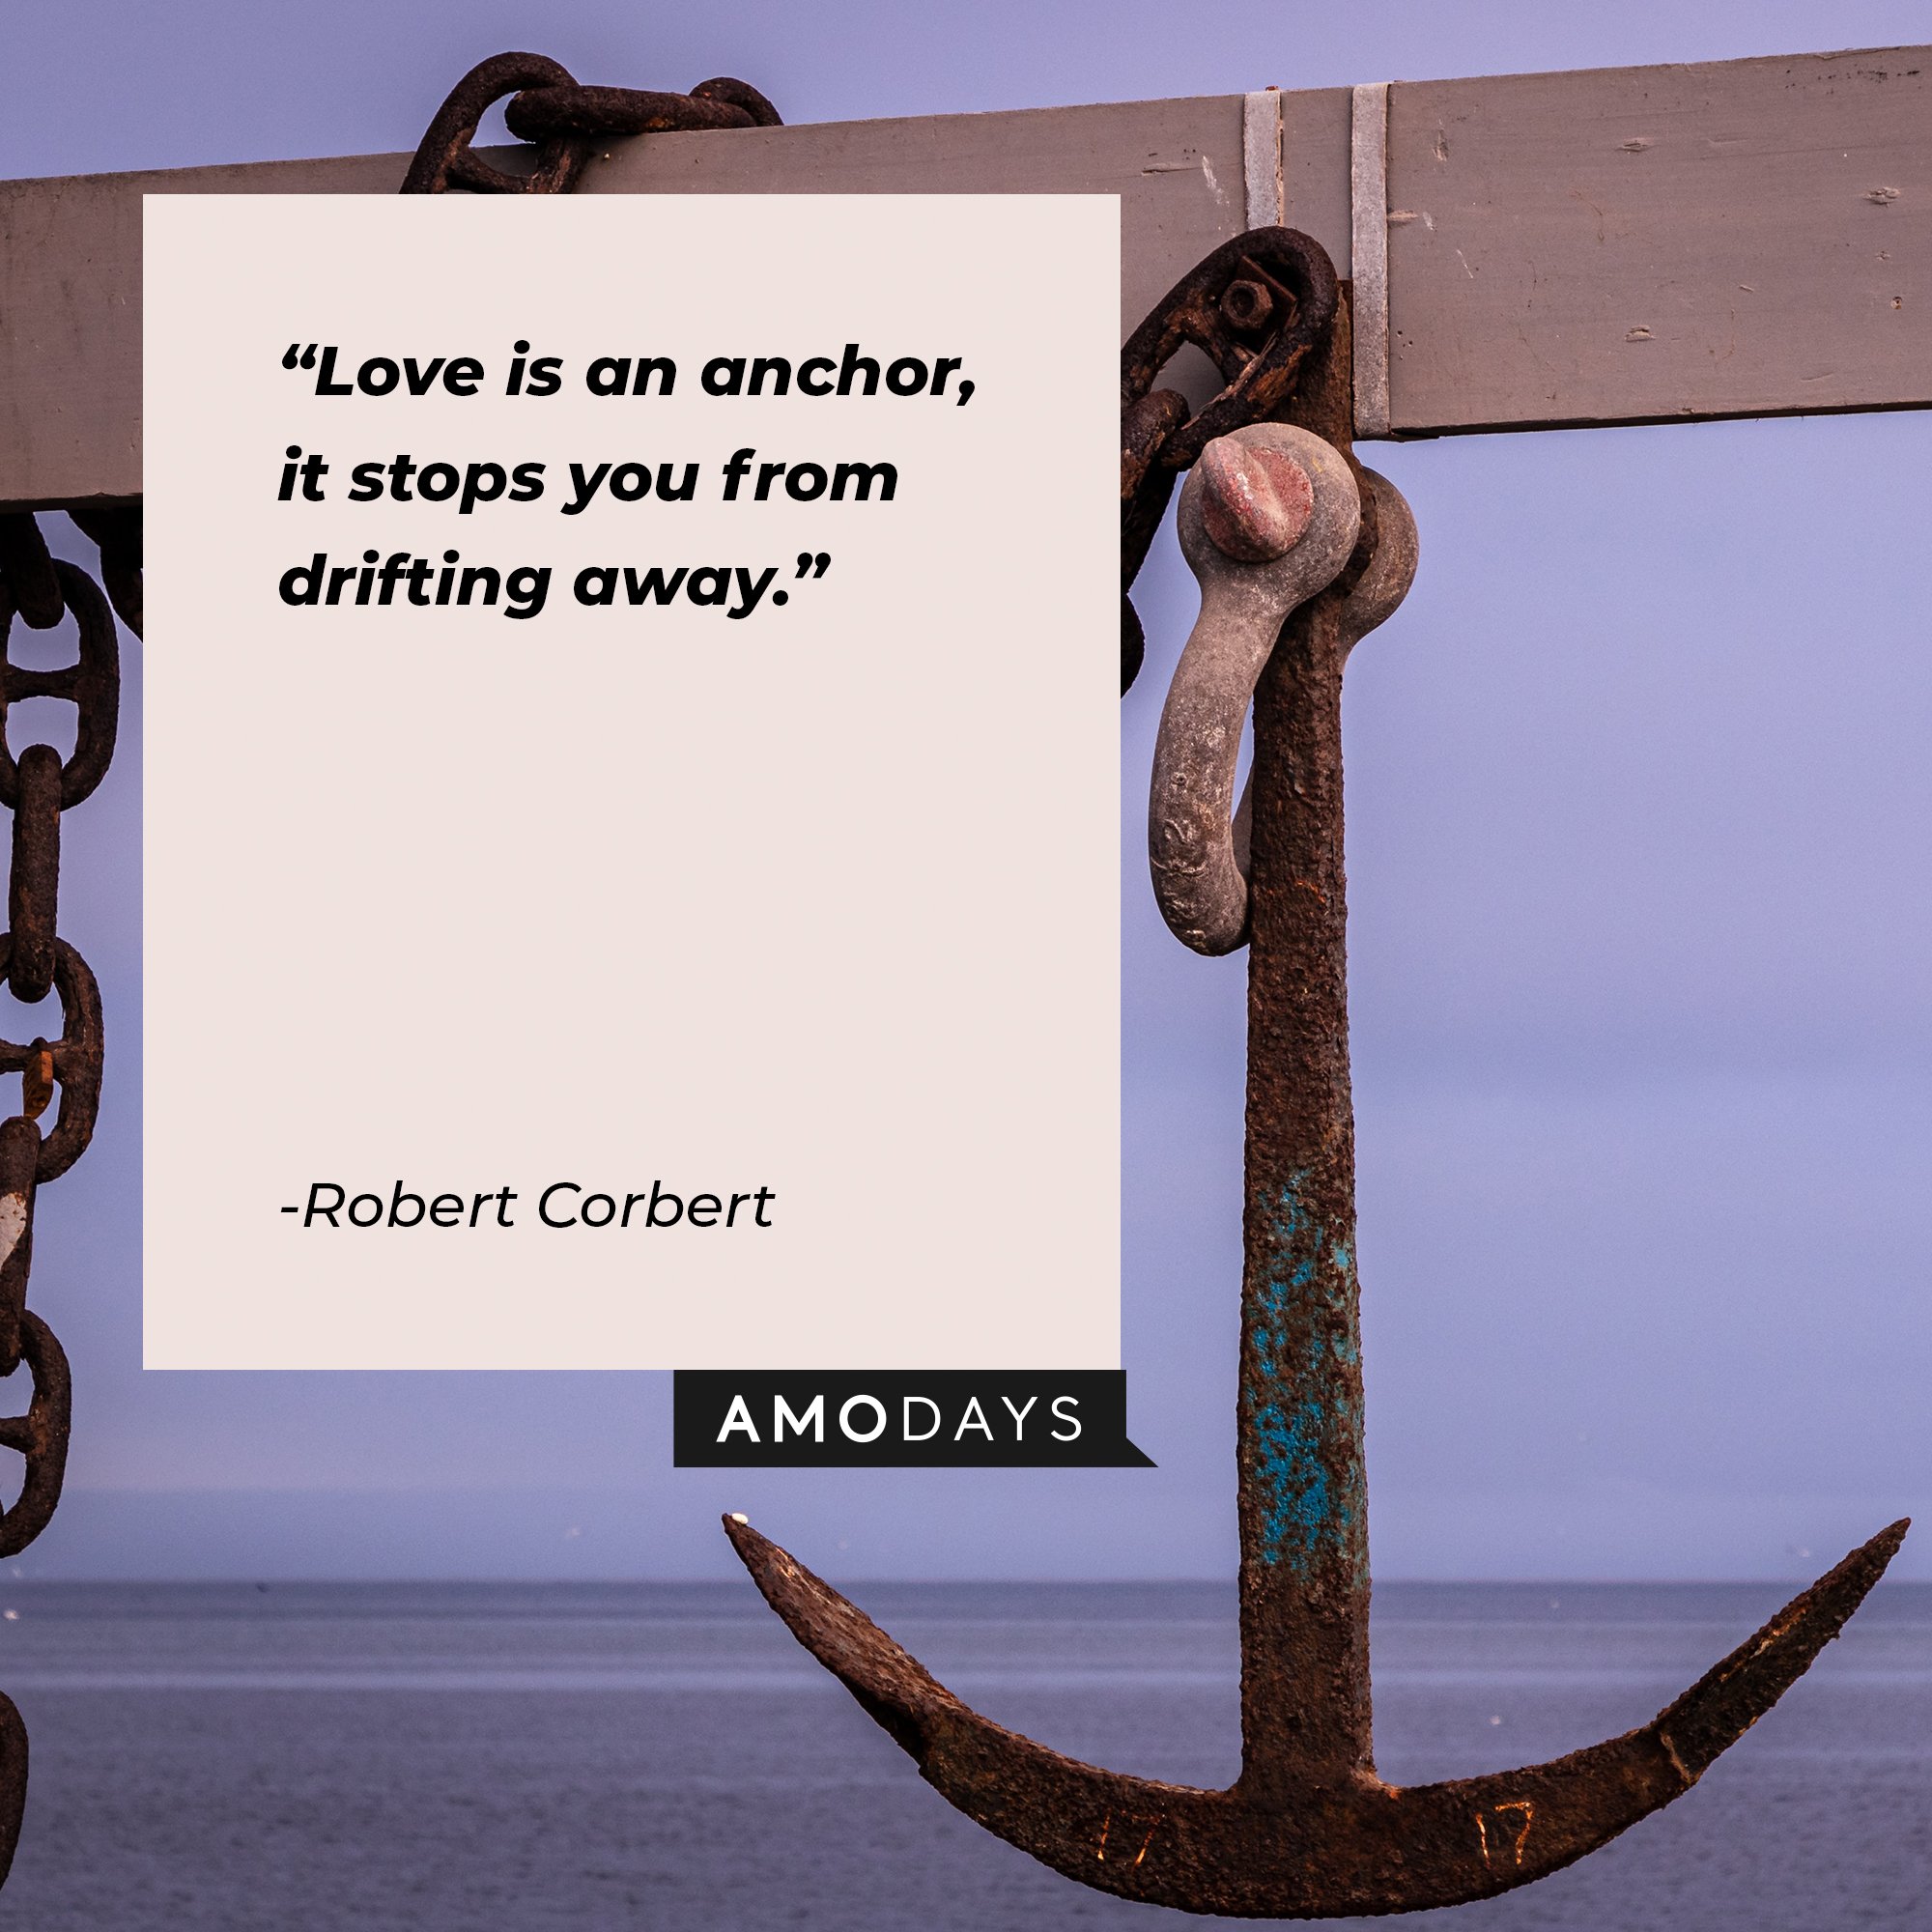 Robert Corbert's quote: "Love is an anchor, it stops you from drifting away." | Image: AmoDays